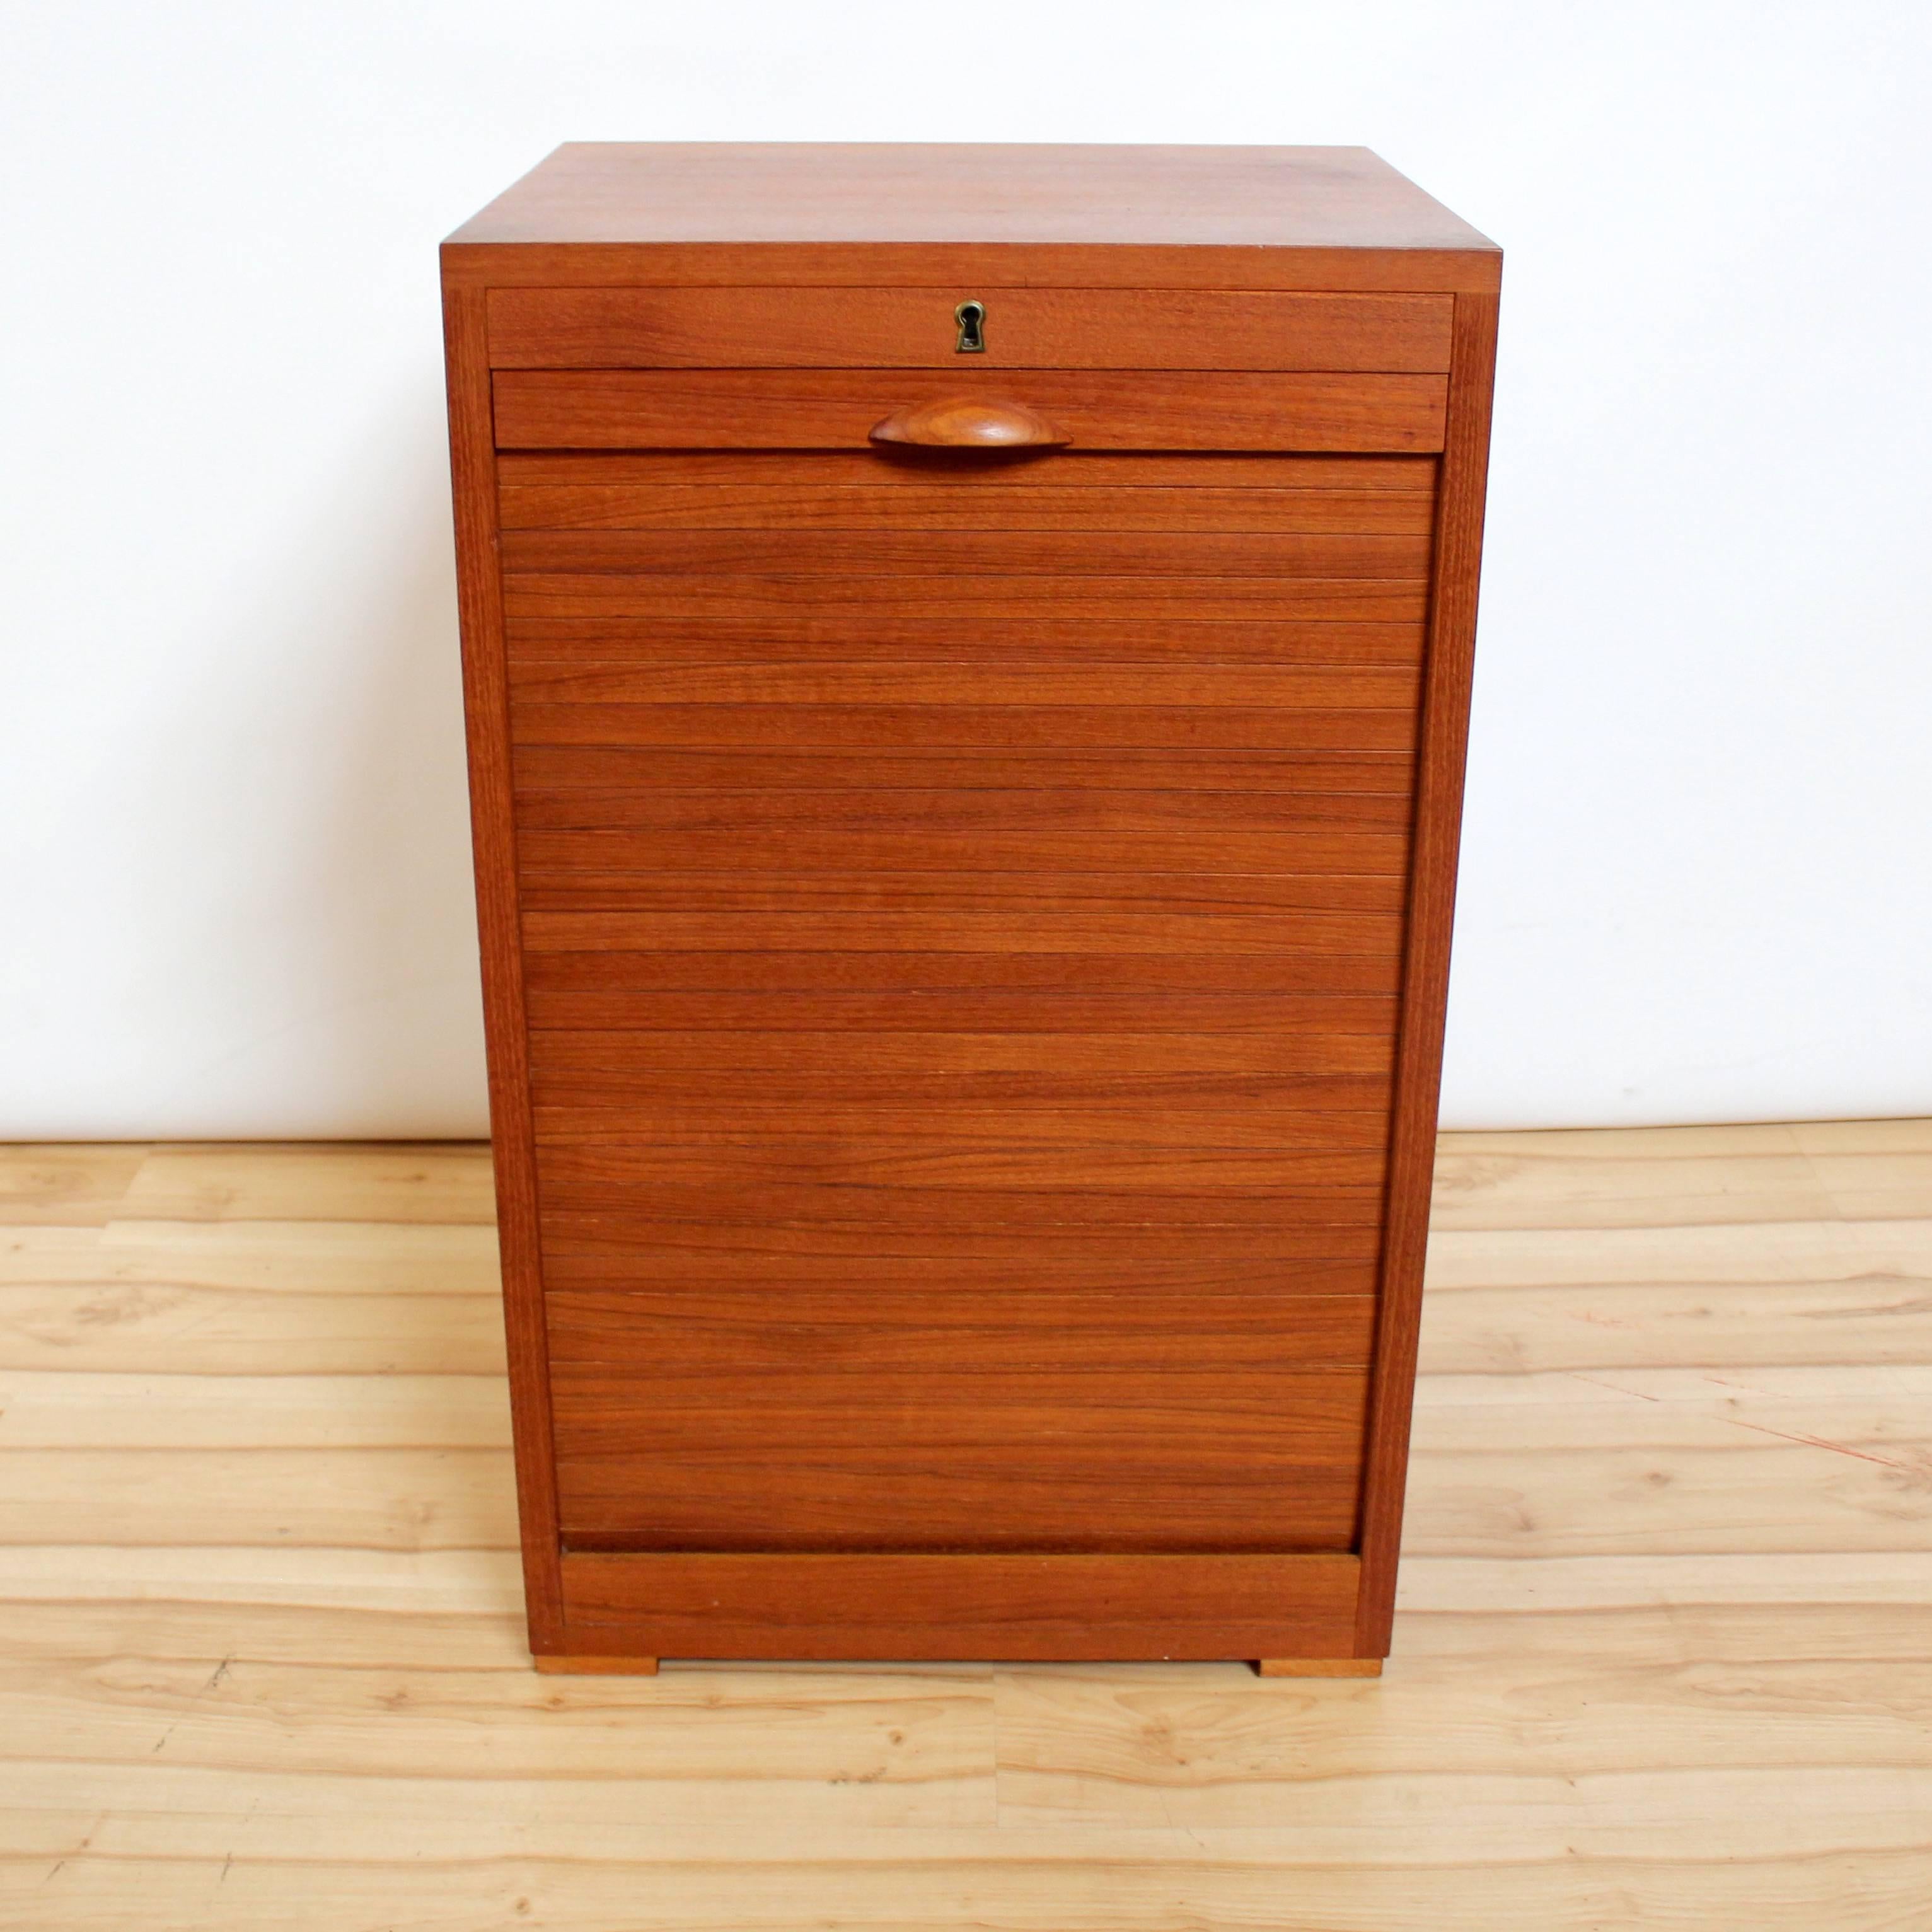 1960s Danish modern teak flat filing cabinet by Frej-Odense. Cabinet features locking tambour door with key and six birch filing drawers. Marked 